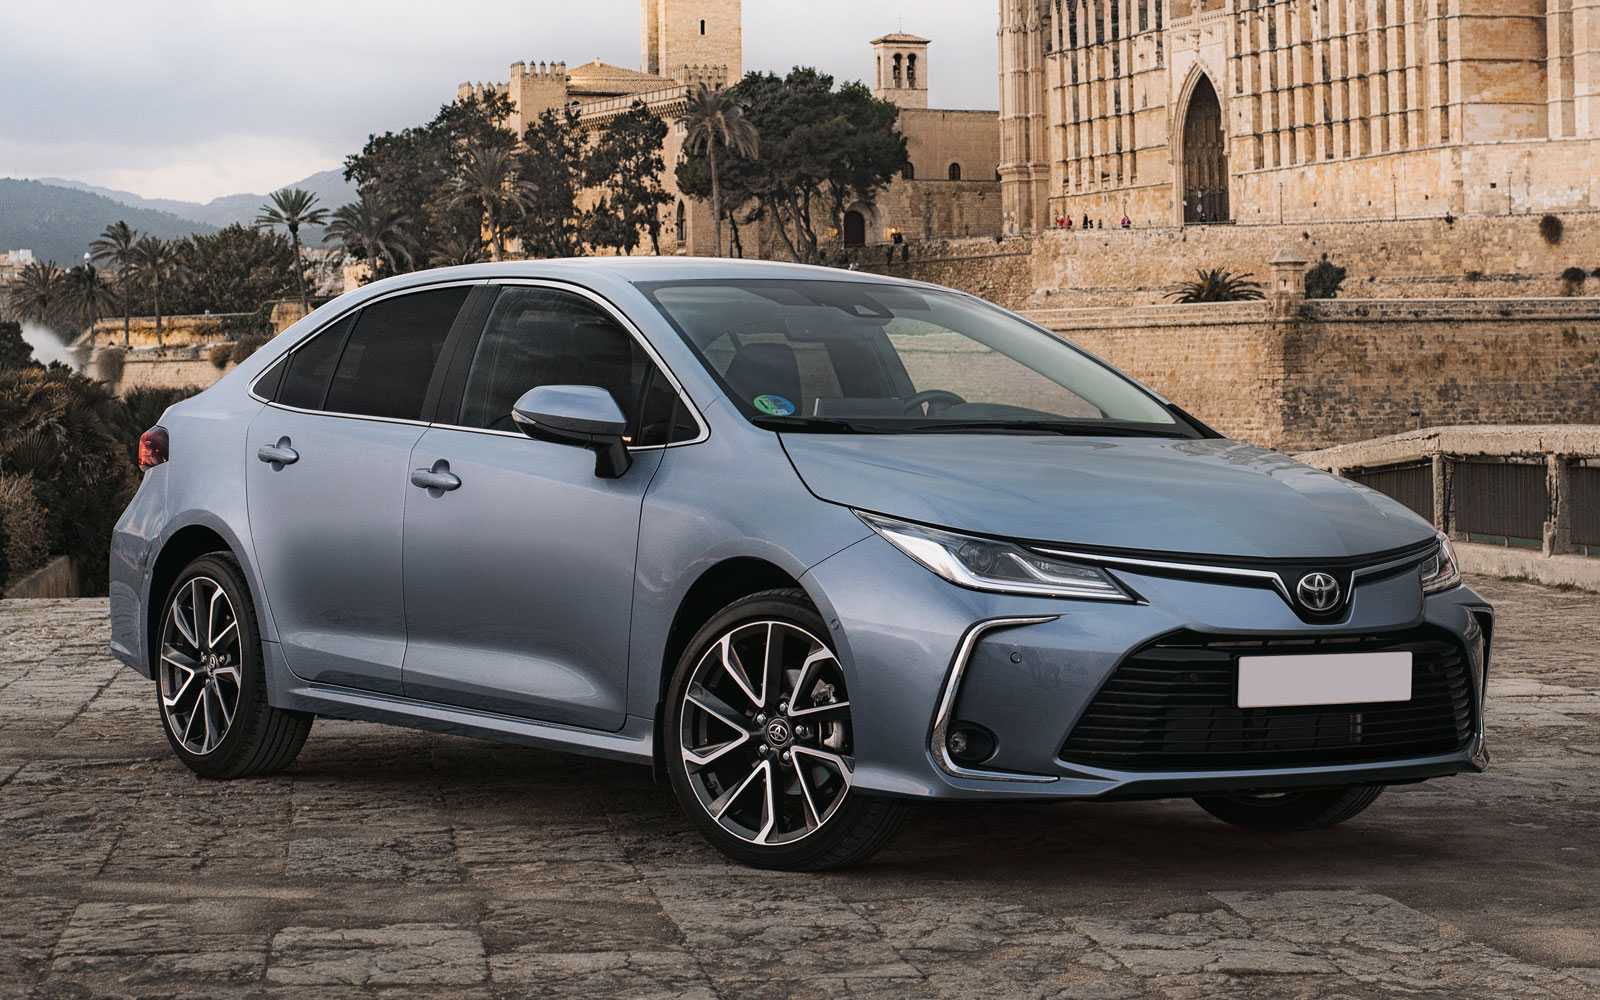 Buy a reliable Toyota Corolla: an enduring attraction in Israel